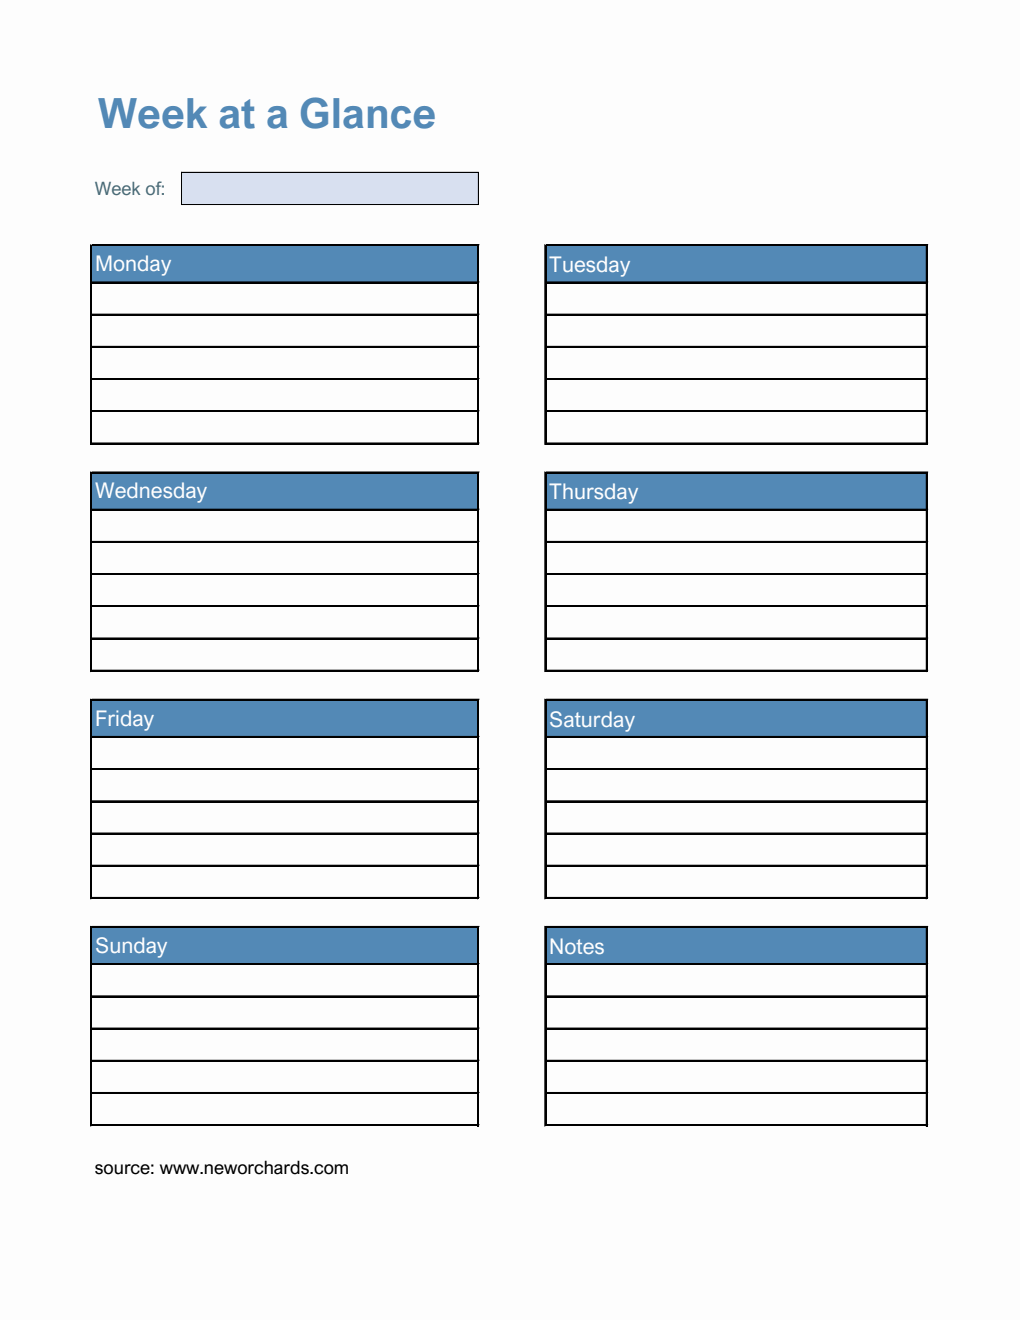 Basic Week at a Glance Template (Excel)